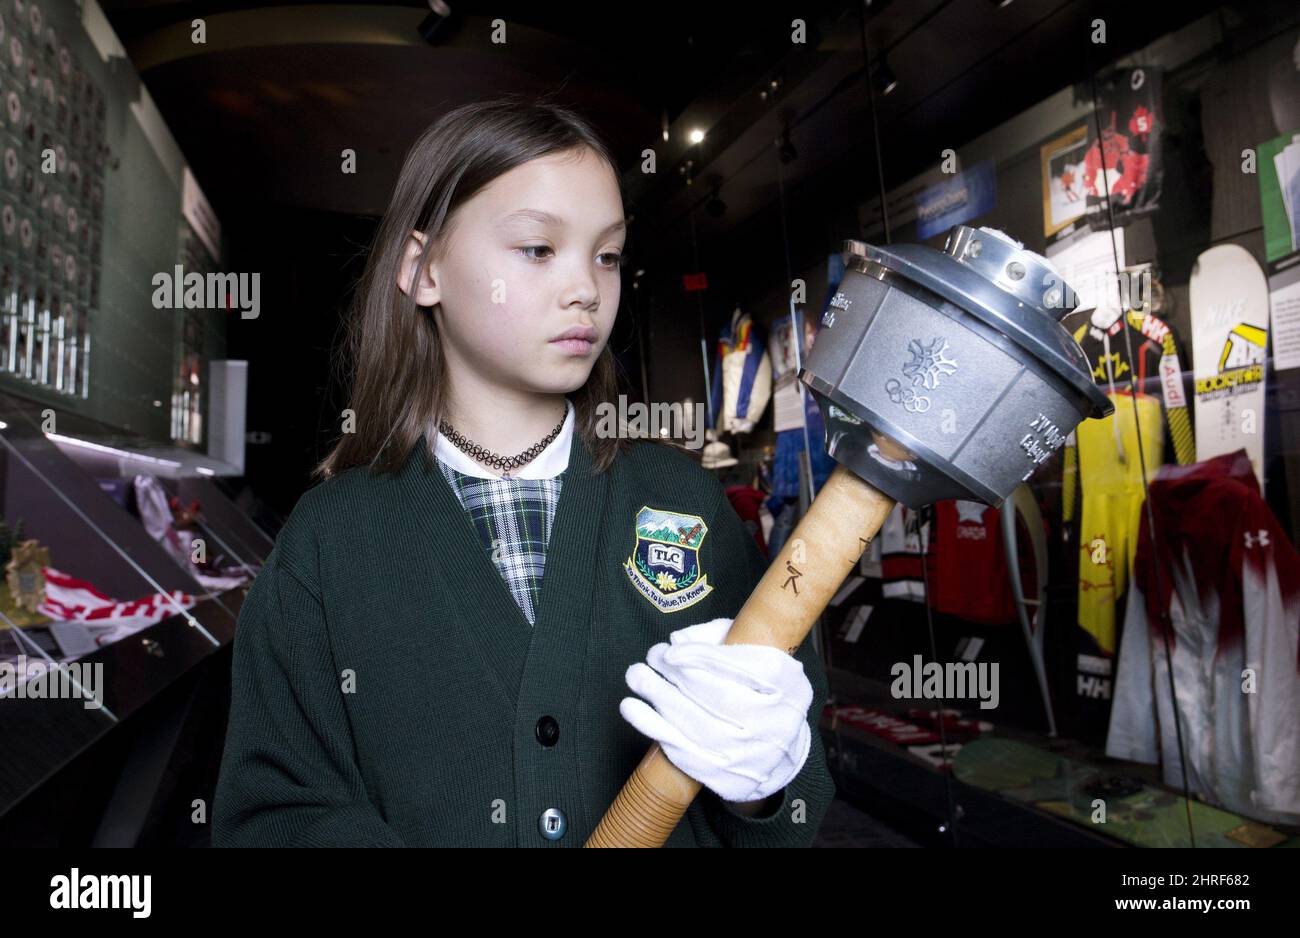 Calgary grade two student Emma Lee, is allowed to hold, with cotton gloves, a 1988 Calgary Winter Olypics torch from the Olympic Torch Run during her school tour at Canada's Sports Hall of Fame in Calgary, Alta. on Wednesday, April 11, 2018. THE CANADIAN PRESS/Larry MacDougal Stock Photo